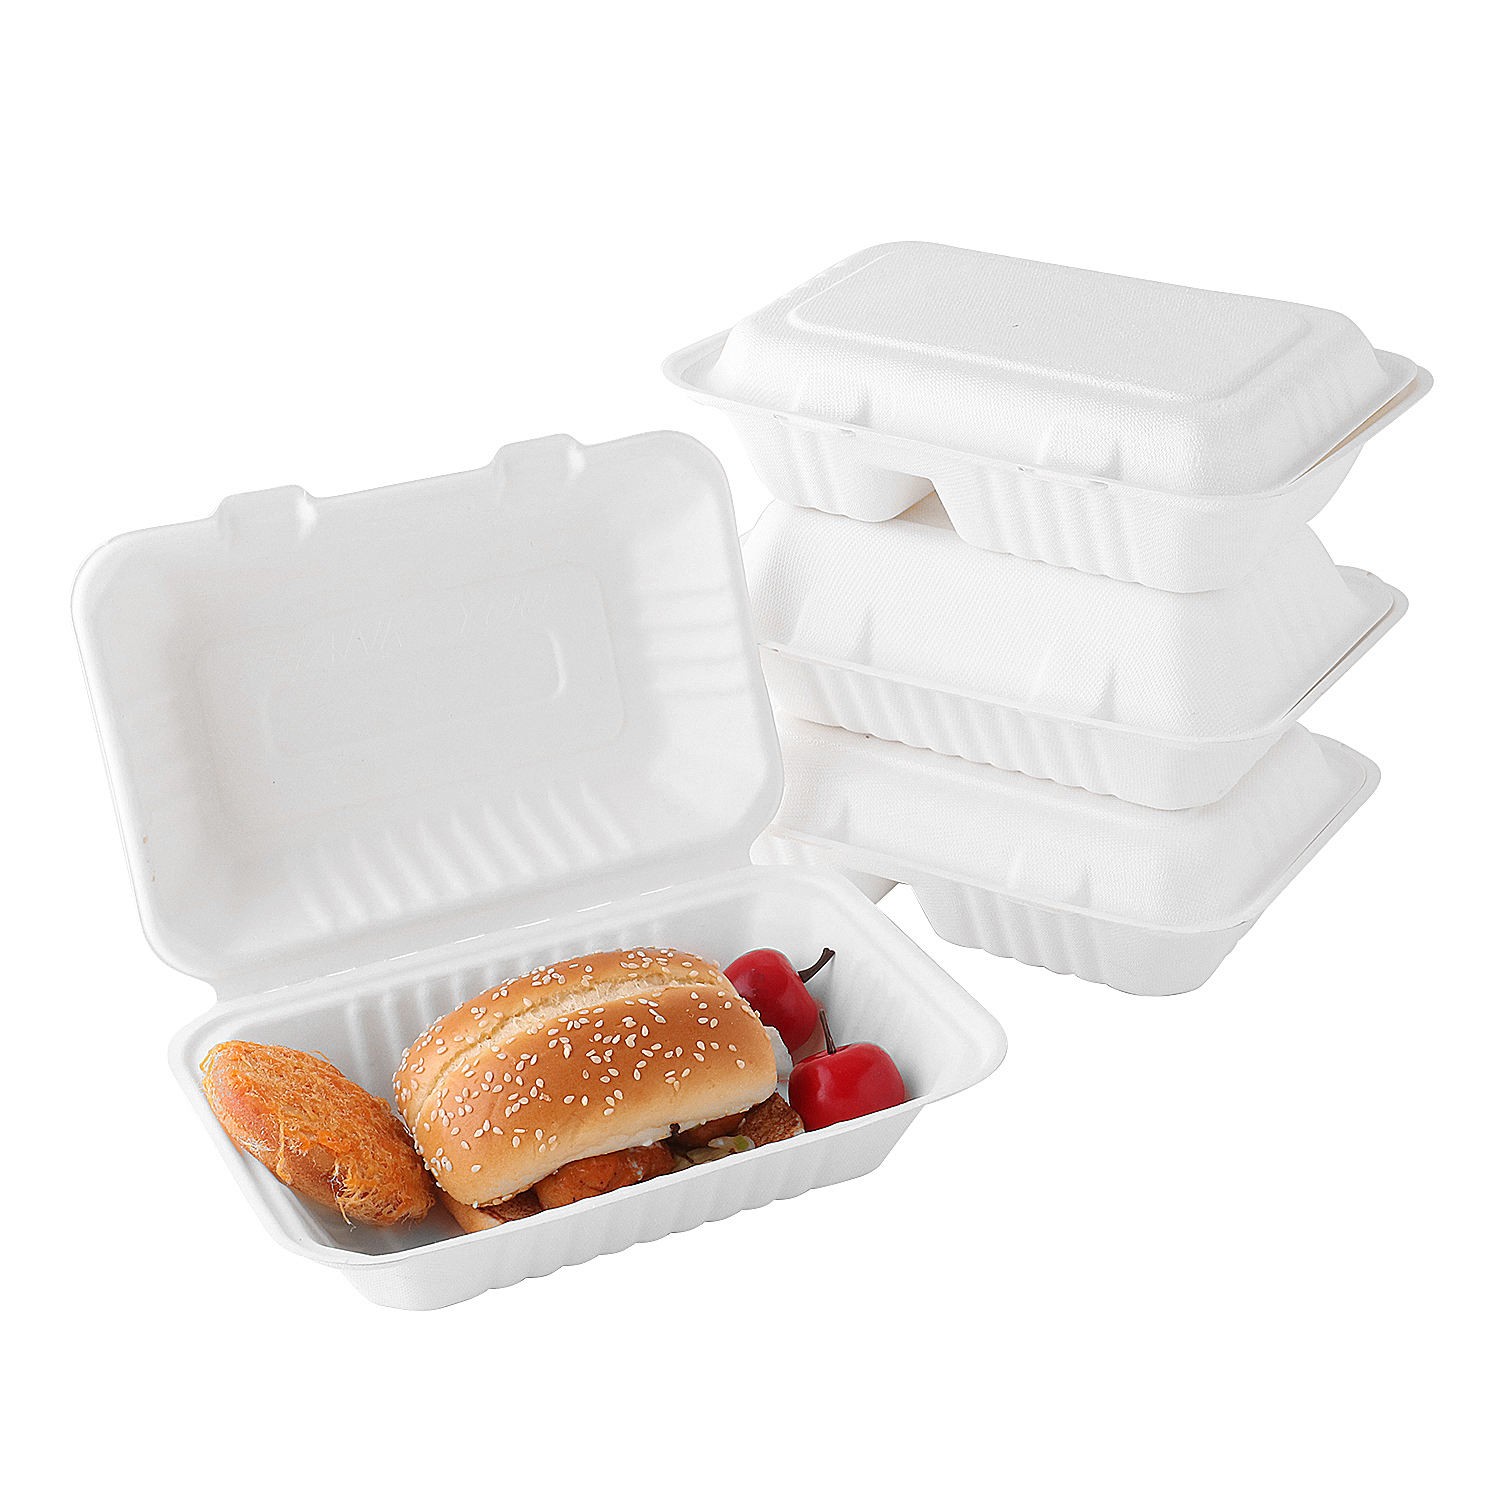 Biodegradable Disposable sugarcane Compartment bagasse Food Container Box&Clamshell